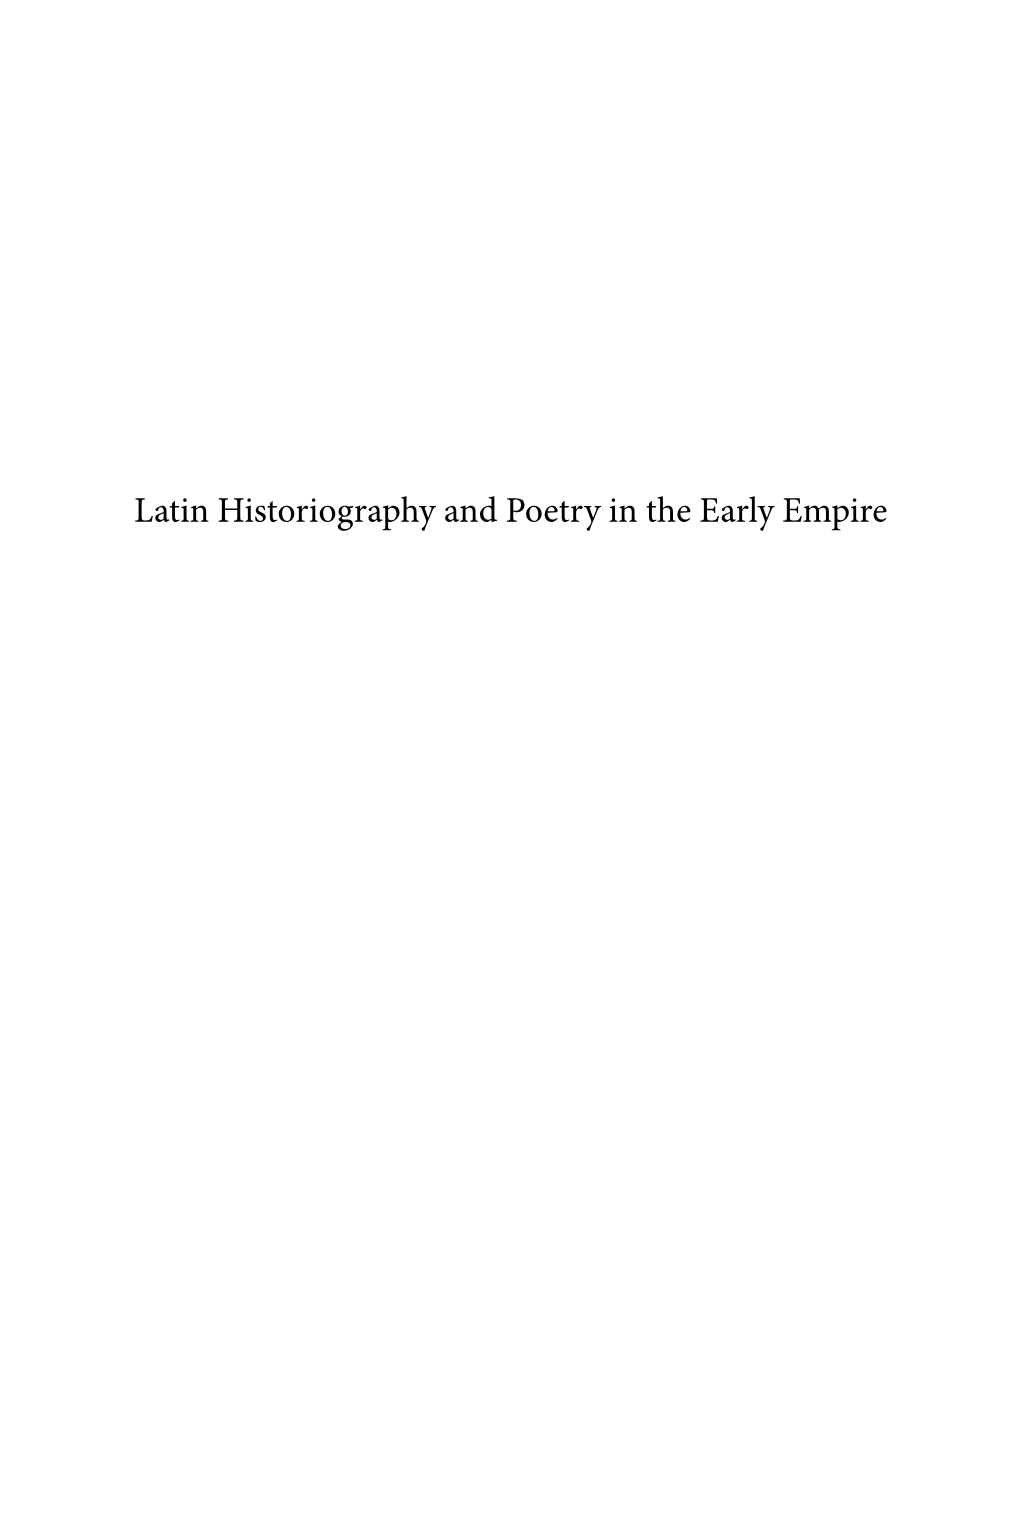 Latin Historiography and Poetry in the Early Empire Mnemosyne